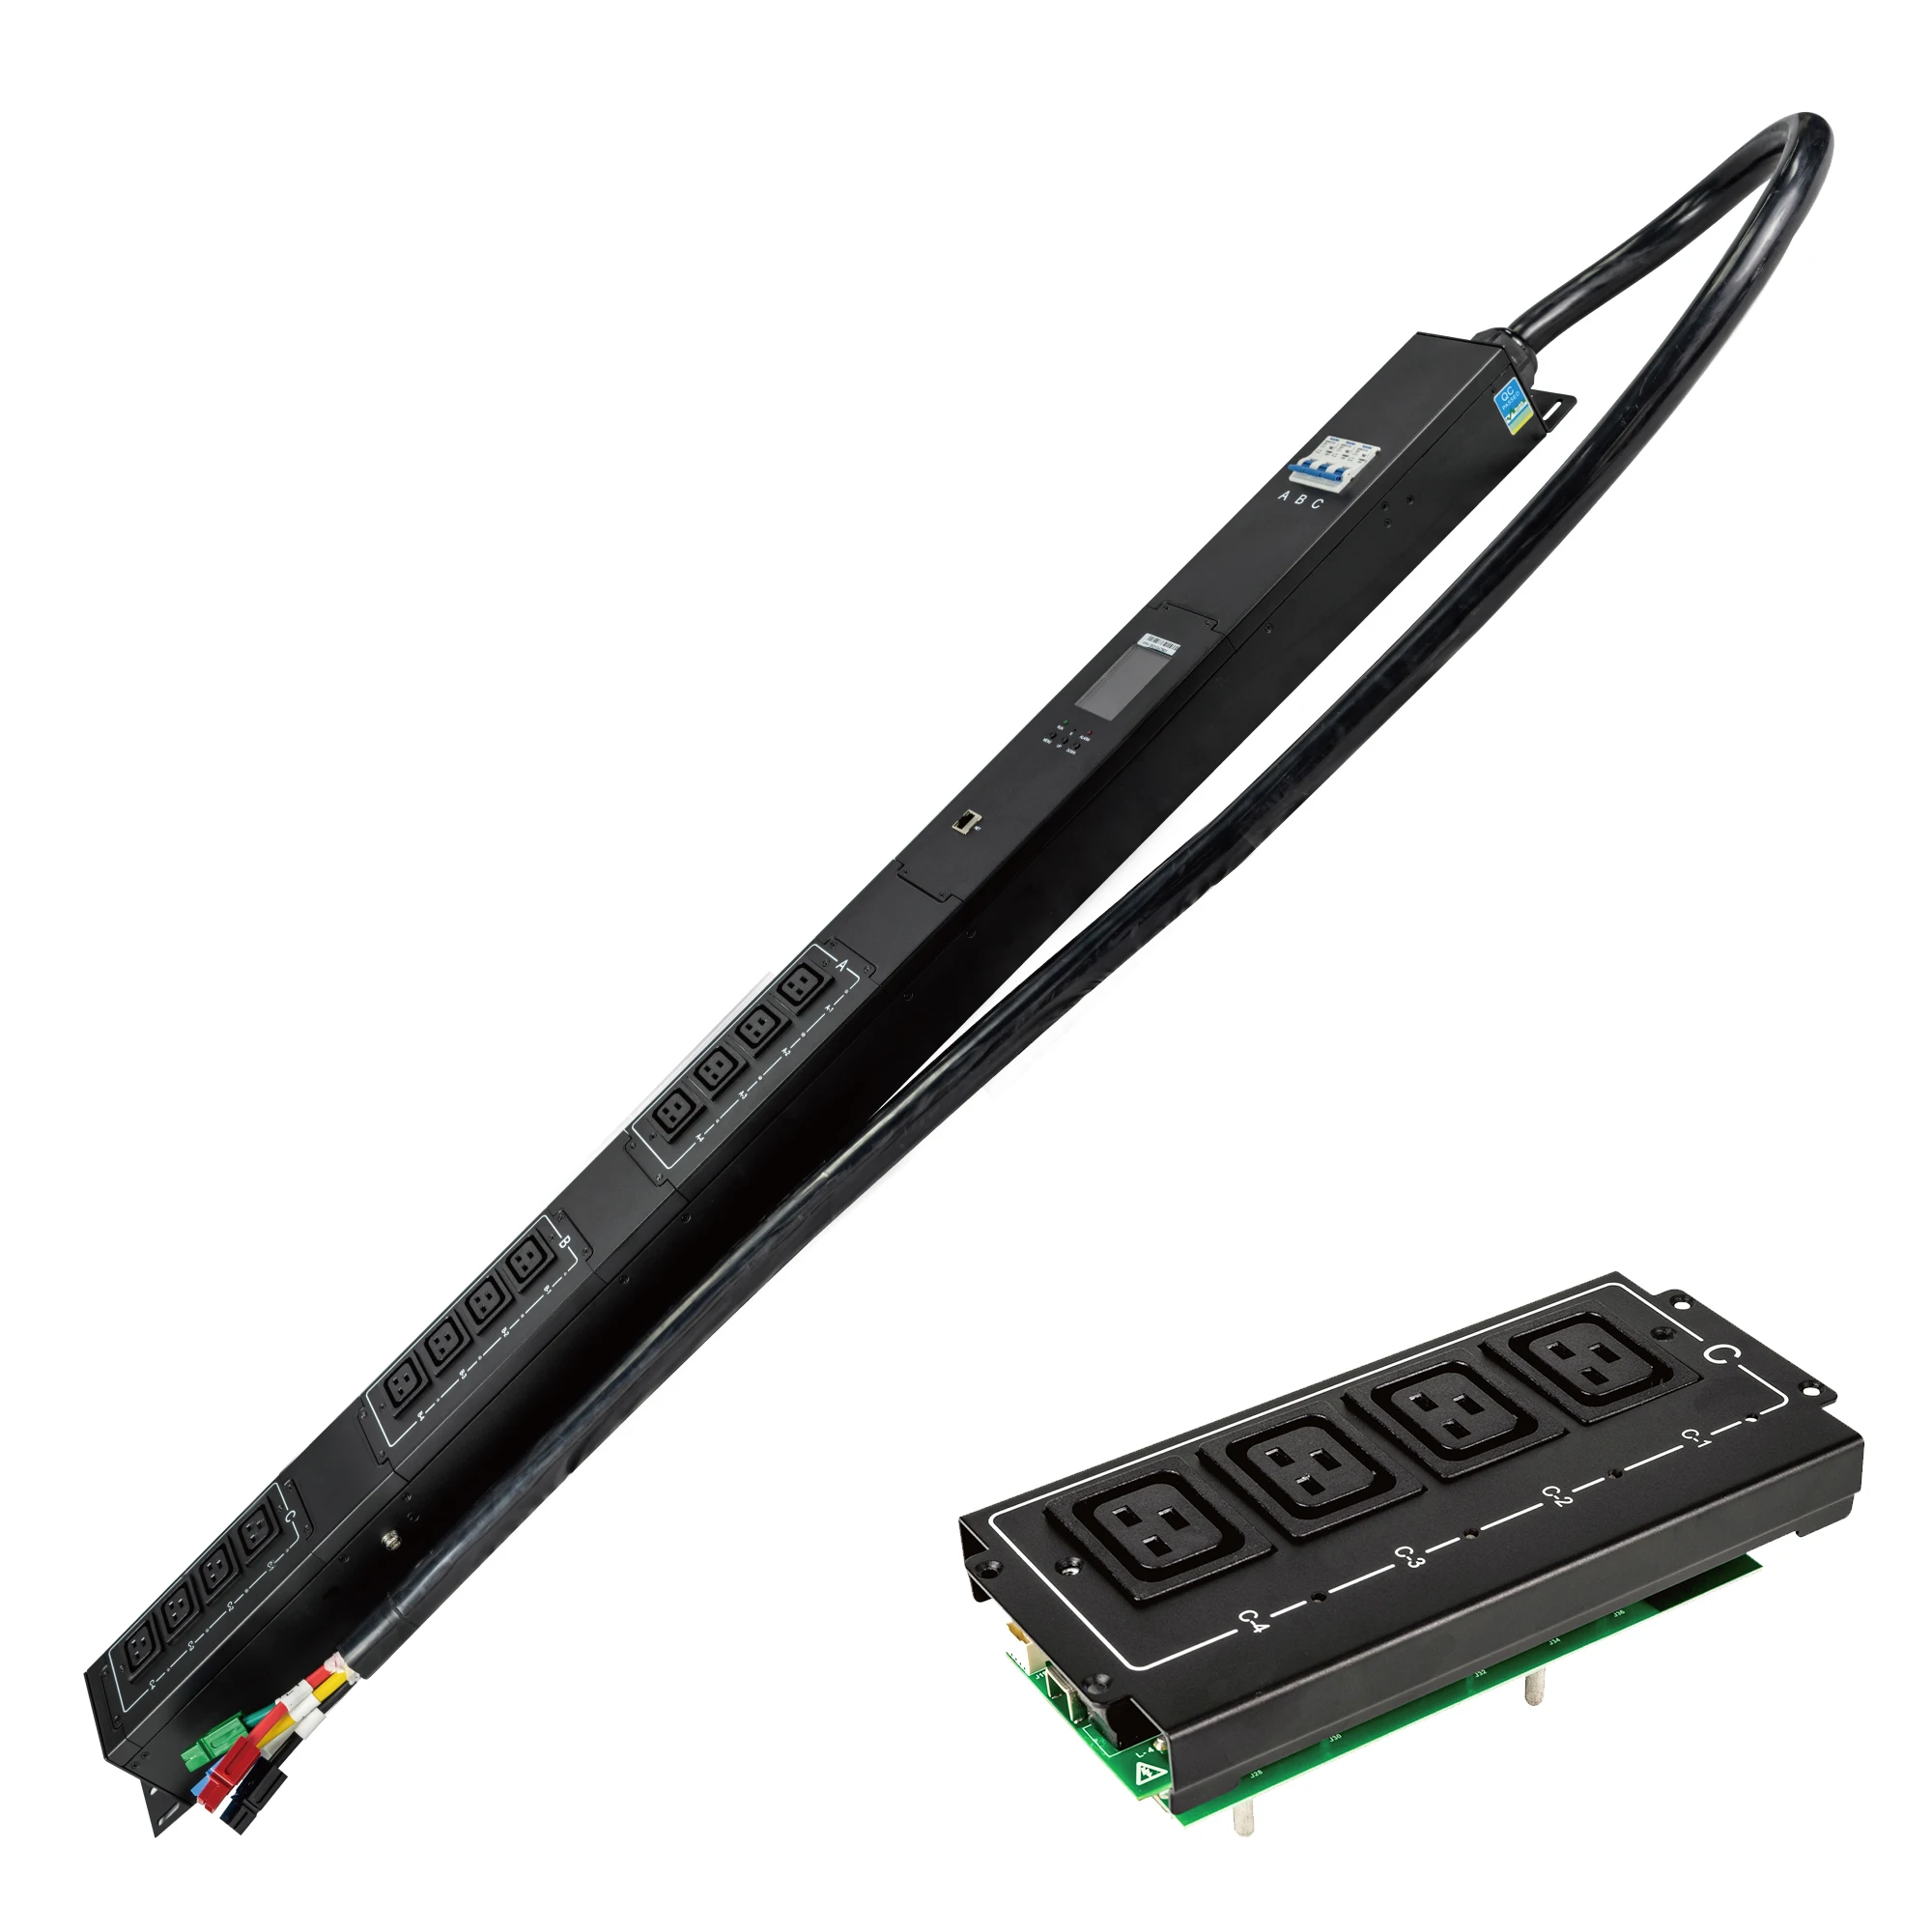 

OEM 12way 415V 100A 75 kW IEC Socket Managed Switched Monitoring C19 PDU Remote control of SNMP UDP